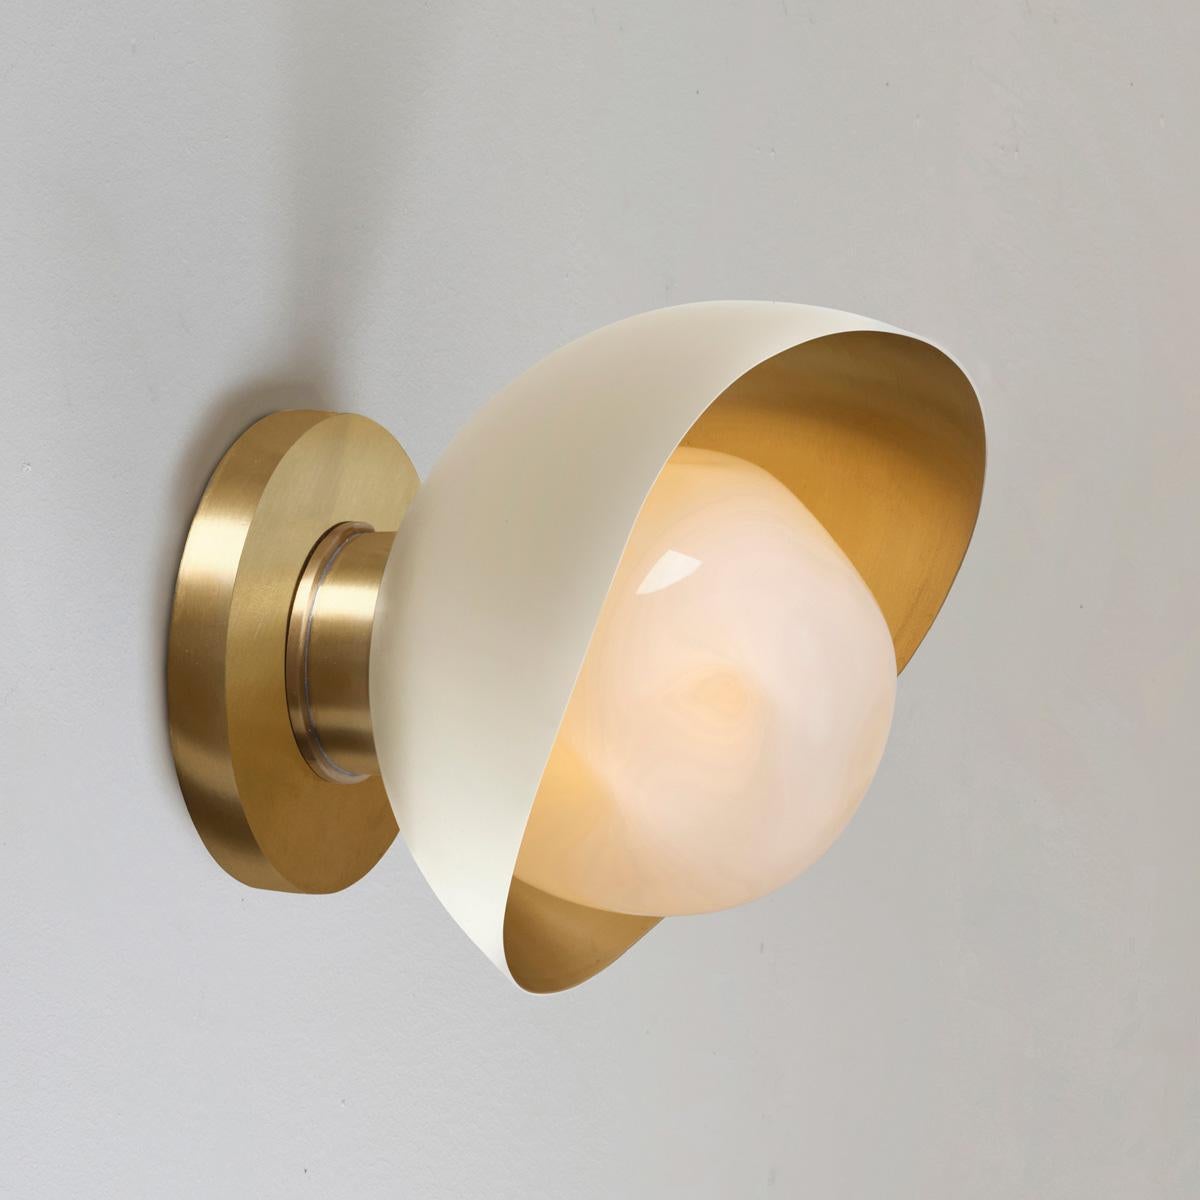 Perla Mini Wall Light by Gaspare Asaro. Black and Polished Brass Finish In New Condition For Sale In New York, NY